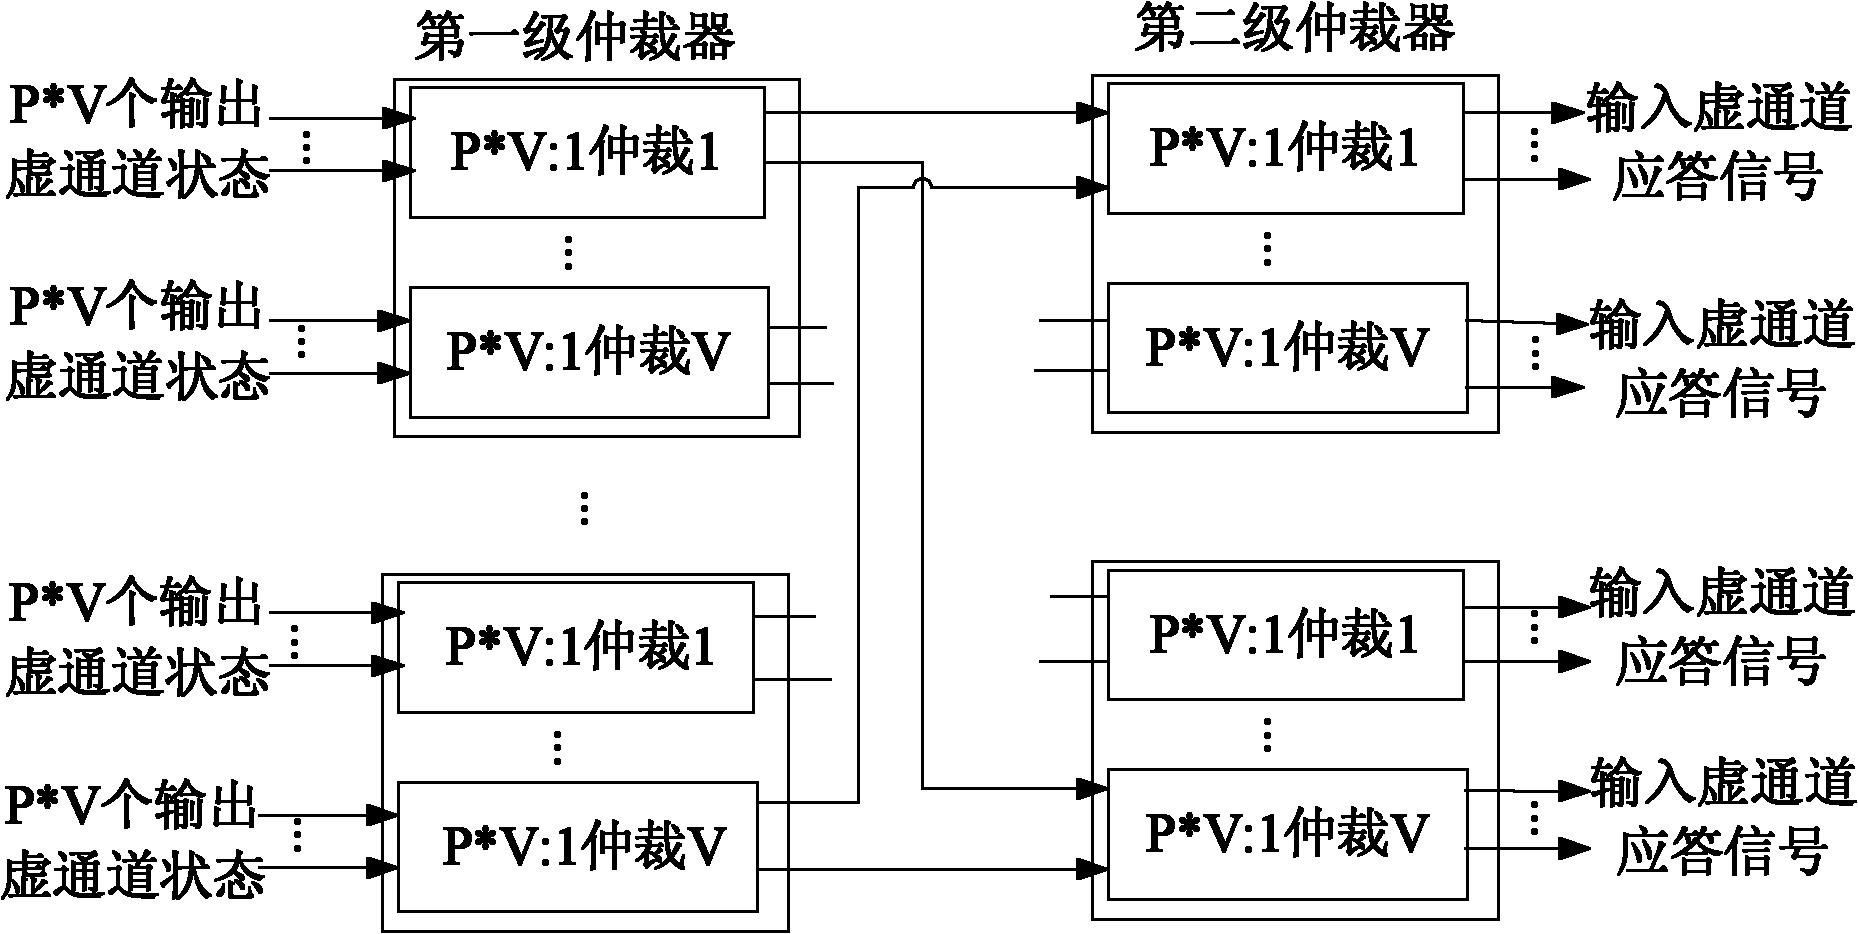 Network-on-chip oriented low delay router structure